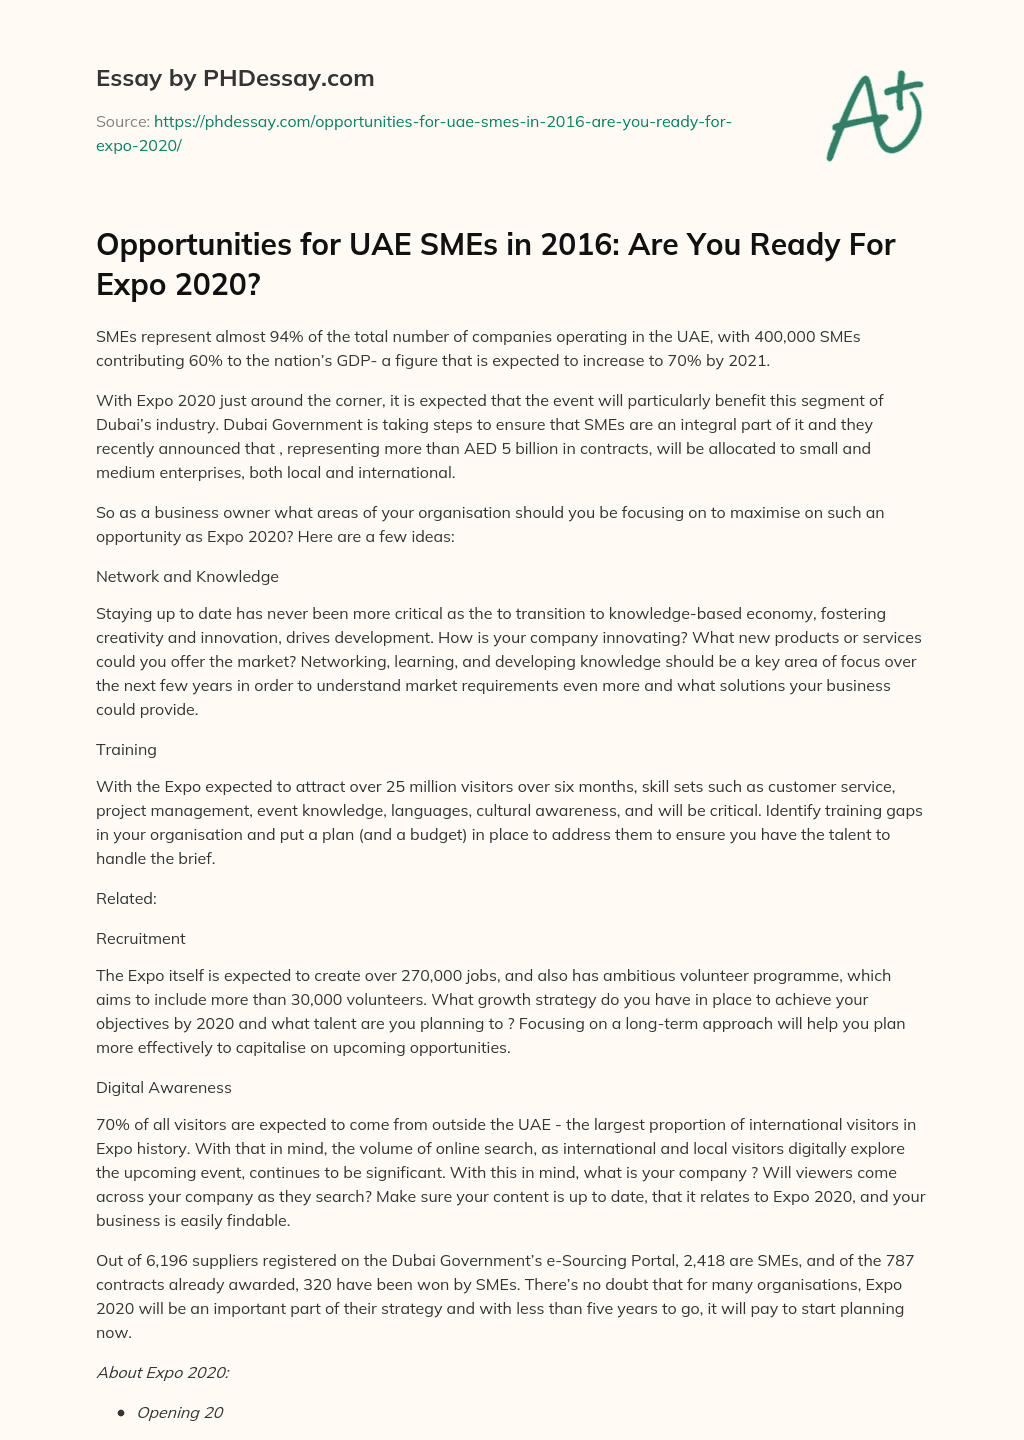 Opportunities for UAE SMEs in 2016: Are You Ready For Expo 2020? essay